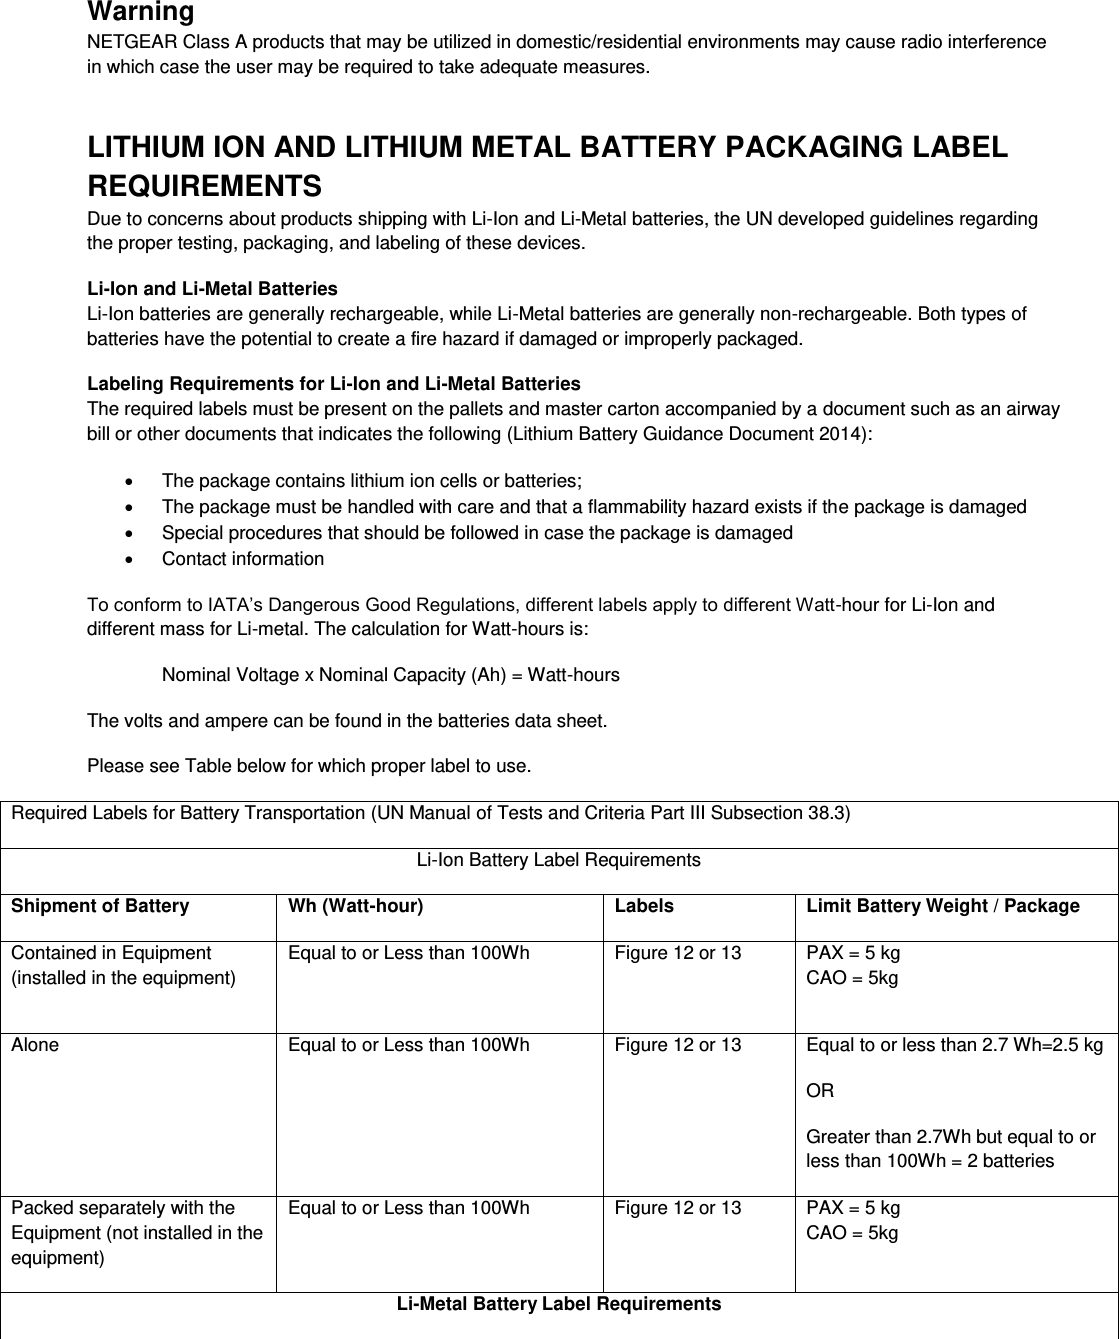  Warning NETGEAR Class A products that may be utilized in domestic/residential environments may cause radio interference in which case the user may be required to take adequate measures.  LITHIUM ION AND LITHIUM METAL BATTERY PACKAGING LABEL REQUIREMENTS  Due to concerns about products shipping with Li-Ion and Li-Metal batteries, the UN developed guidelines regarding the proper testing, packaging, and labeling of these devices.  Li-Ion and Li-Metal Batteries Li-Ion batteries are generally rechargeable, while Li-Metal batteries are generally non-rechargeable. Both types of batteries have the potential to create a fire hazard if damaged or improperly packaged.  Labeling Requirements for Li-Ion and Li-Metal Batteries The required labels must be present on the pallets and master carton accompanied by a document such as an airway bill or other documents that indicates the following (Lithium Battery Guidance Document 2014):   The package contains lithium ion cells or batteries;   The package must be handled with care and that a flammability hazard exists if the package is damaged   Special procedures that should be followed in case the package is damaged   Contact information To conform to IATA’s Dangerous Good Regulations, different labels apply to different Watt-hour for Li-Ion and different mass for Li-metal. The calculation for Watt-hours is: Nominal Voltage x Nominal Capacity (Ah) = Watt-hours The volts and ampere can be found in the batteries data sheet. Please see Table below for which proper label to use. Required Labels for Battery Transportation (UN Manual of Tests and Criteria Part III Subsection 38.3) Li-Ion Battery Label Requirements Shipment of Battery Wh (Watt-hour) Labels Limit Battery Weight / Package Contained in Equipment (installed in the equipment) Equal to or Less than 100Wh  Figure 12 or 13  PAX = 5 kg CAO = 5kg Alone  Equal to or Less than 100Wh  Figure 12 or 13  Equal to or less than 2.7 Wh=2.5 kg OR Greater than 2.7Wh but equal to or less than 100Wh = 2 batteries Packed separately with the Equipment (not installed in the equipment) Equal to or Less than 100Wh Figure 12 or 13  PAX = 5 kg CAO = 5kg Li-Metal Battery Label Requirements 